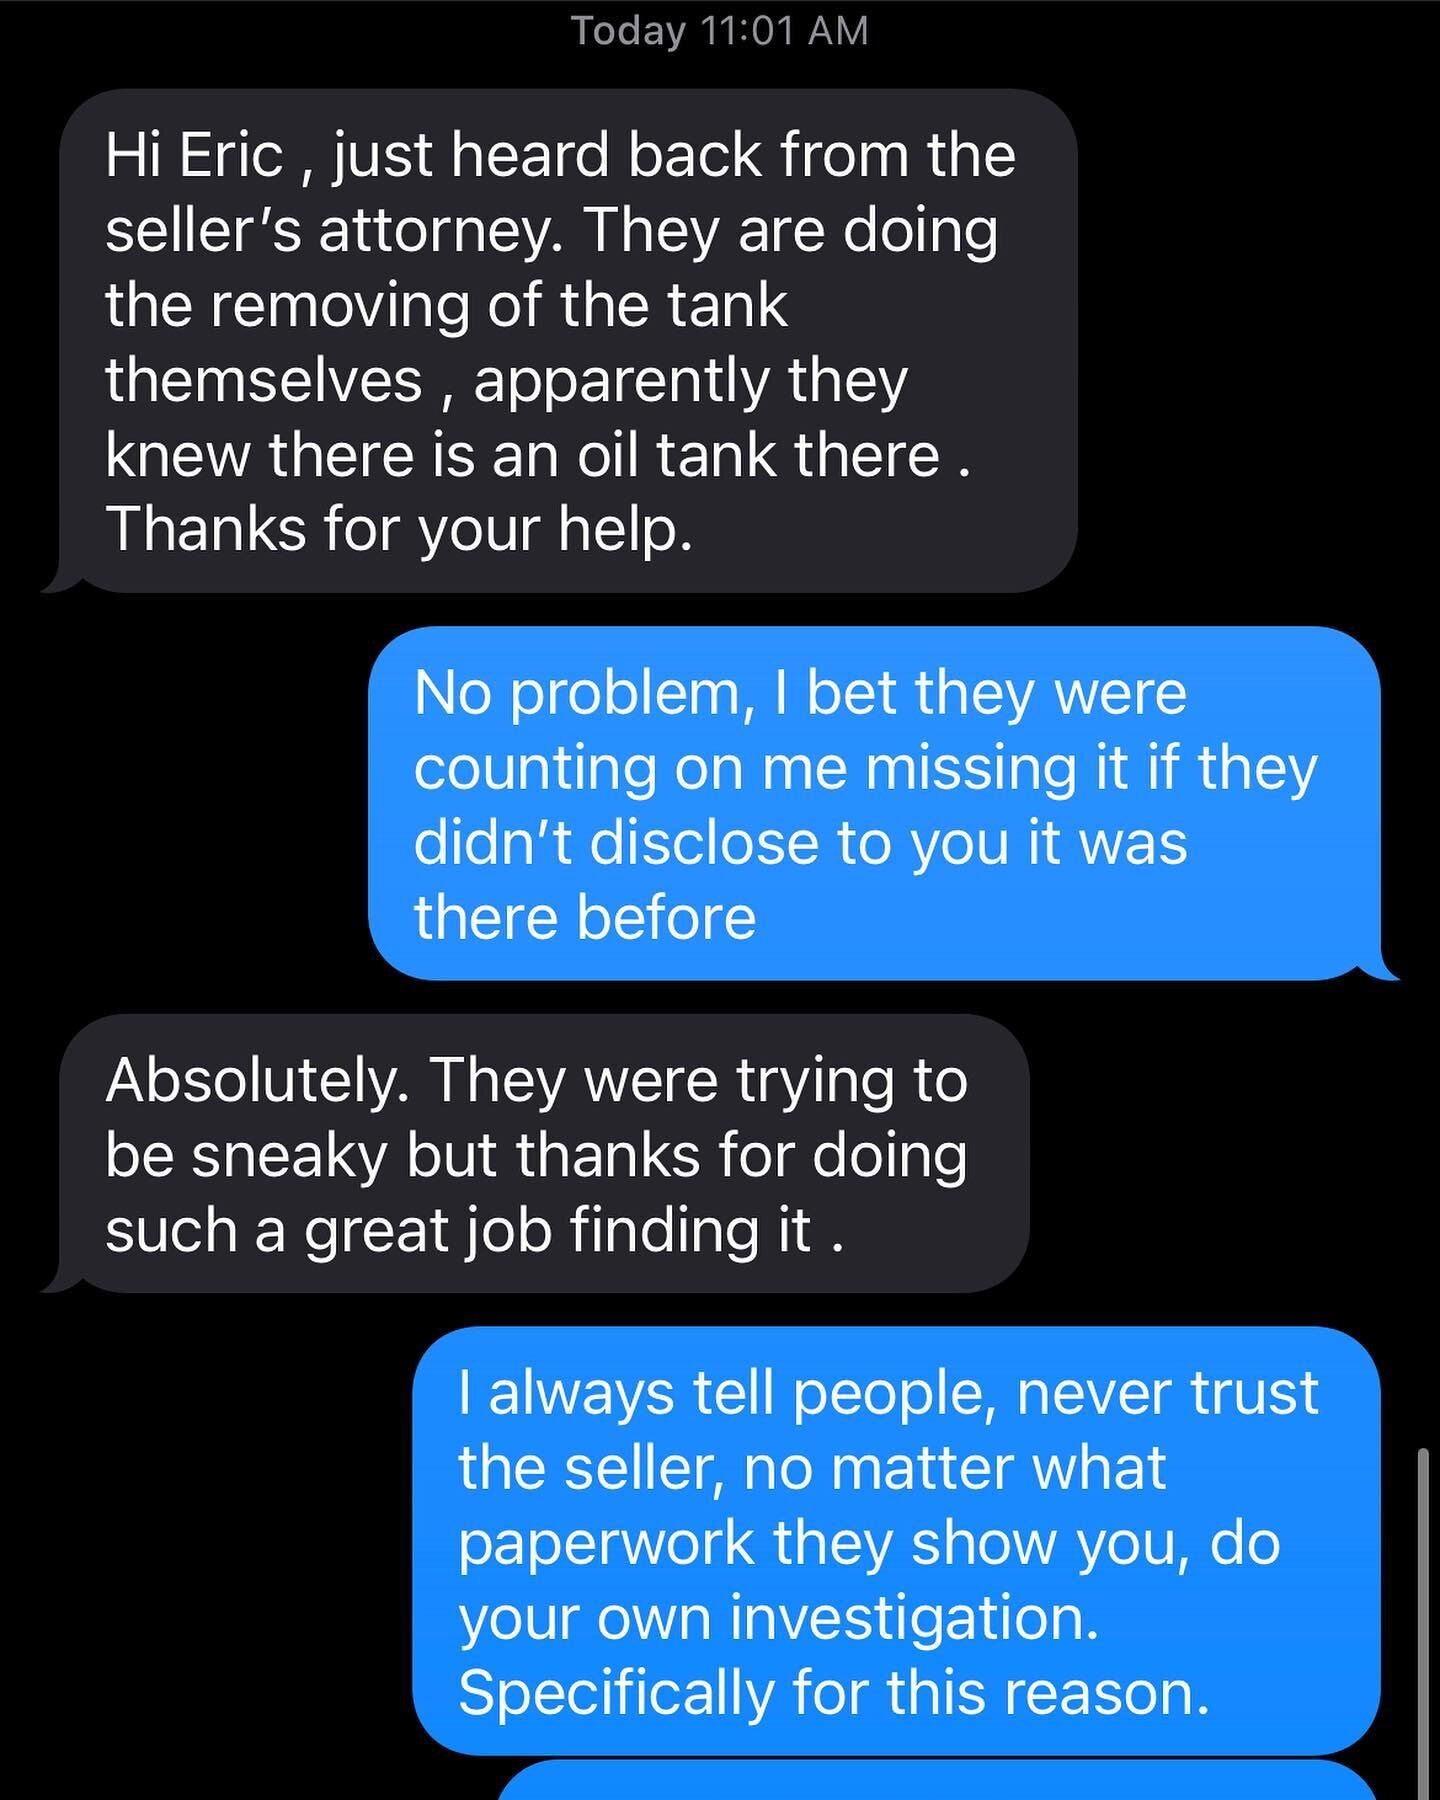 I hate to say this but, DON&rsquo;T EVER TRUST THE SELLER. They will withhold any info they can from a disclosure if they can get away with it. Bc once u take possession of the property it&rsquo;s YOUR problem. 

However, in this scenario it would be